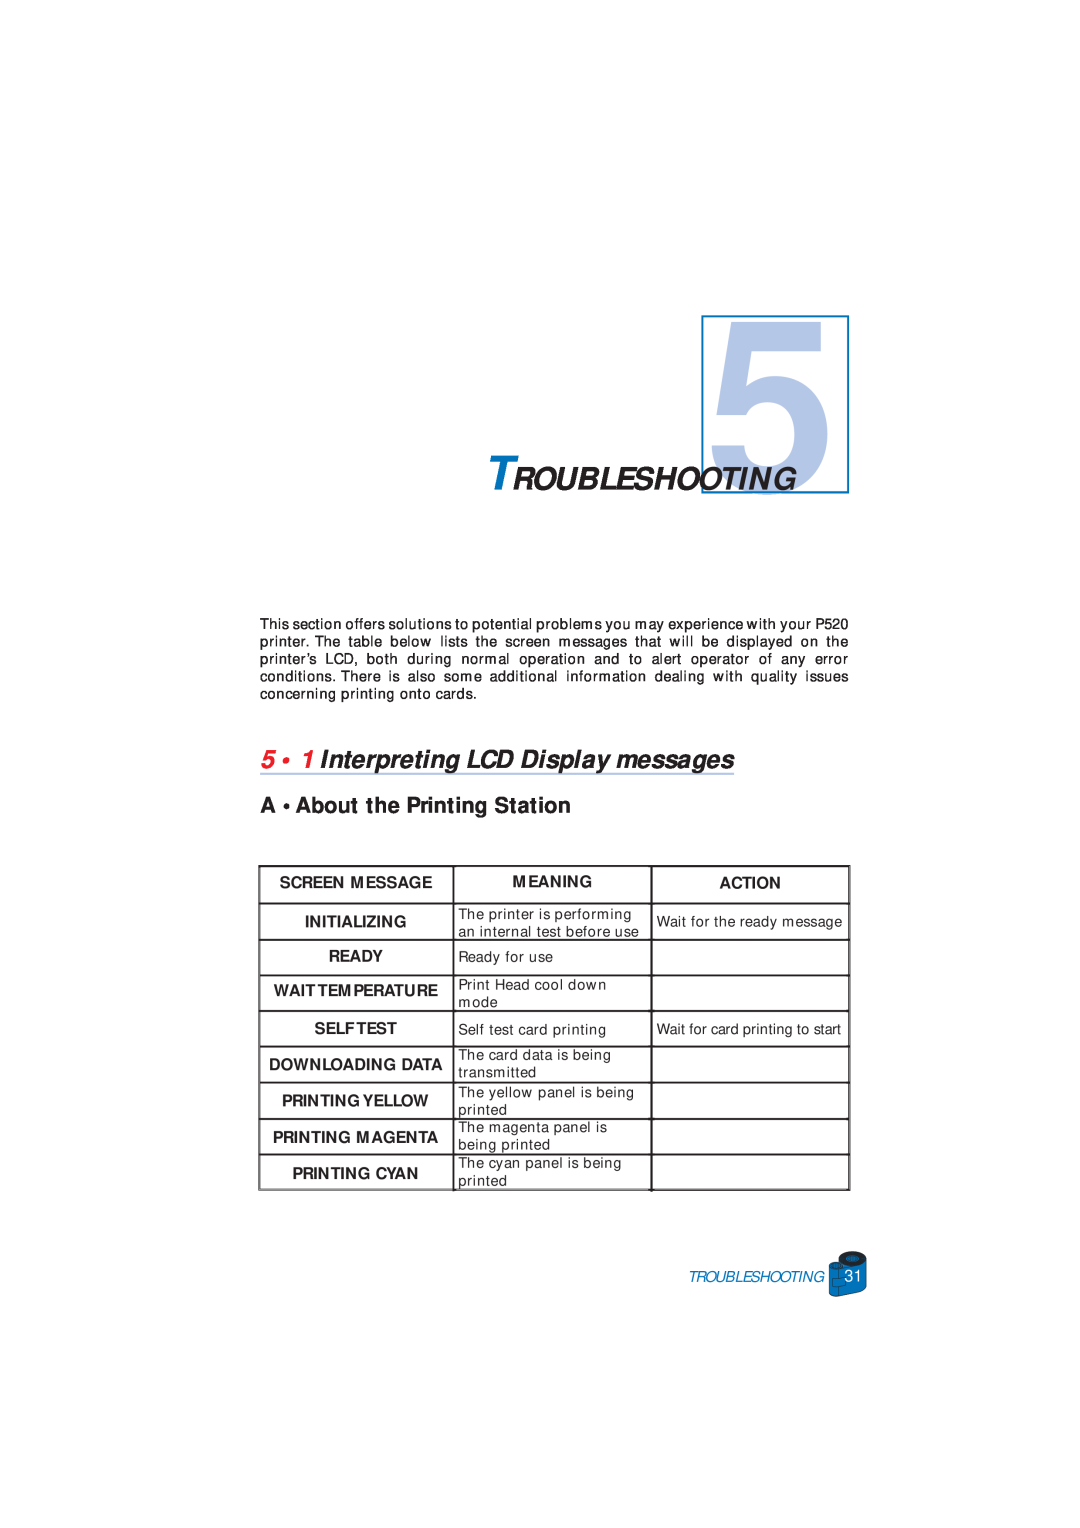 Zebra Technologies P520 user manual TROUBLESHOOTING5, 5 1 Interpreting LCD Display messages, A About the Printing Station 